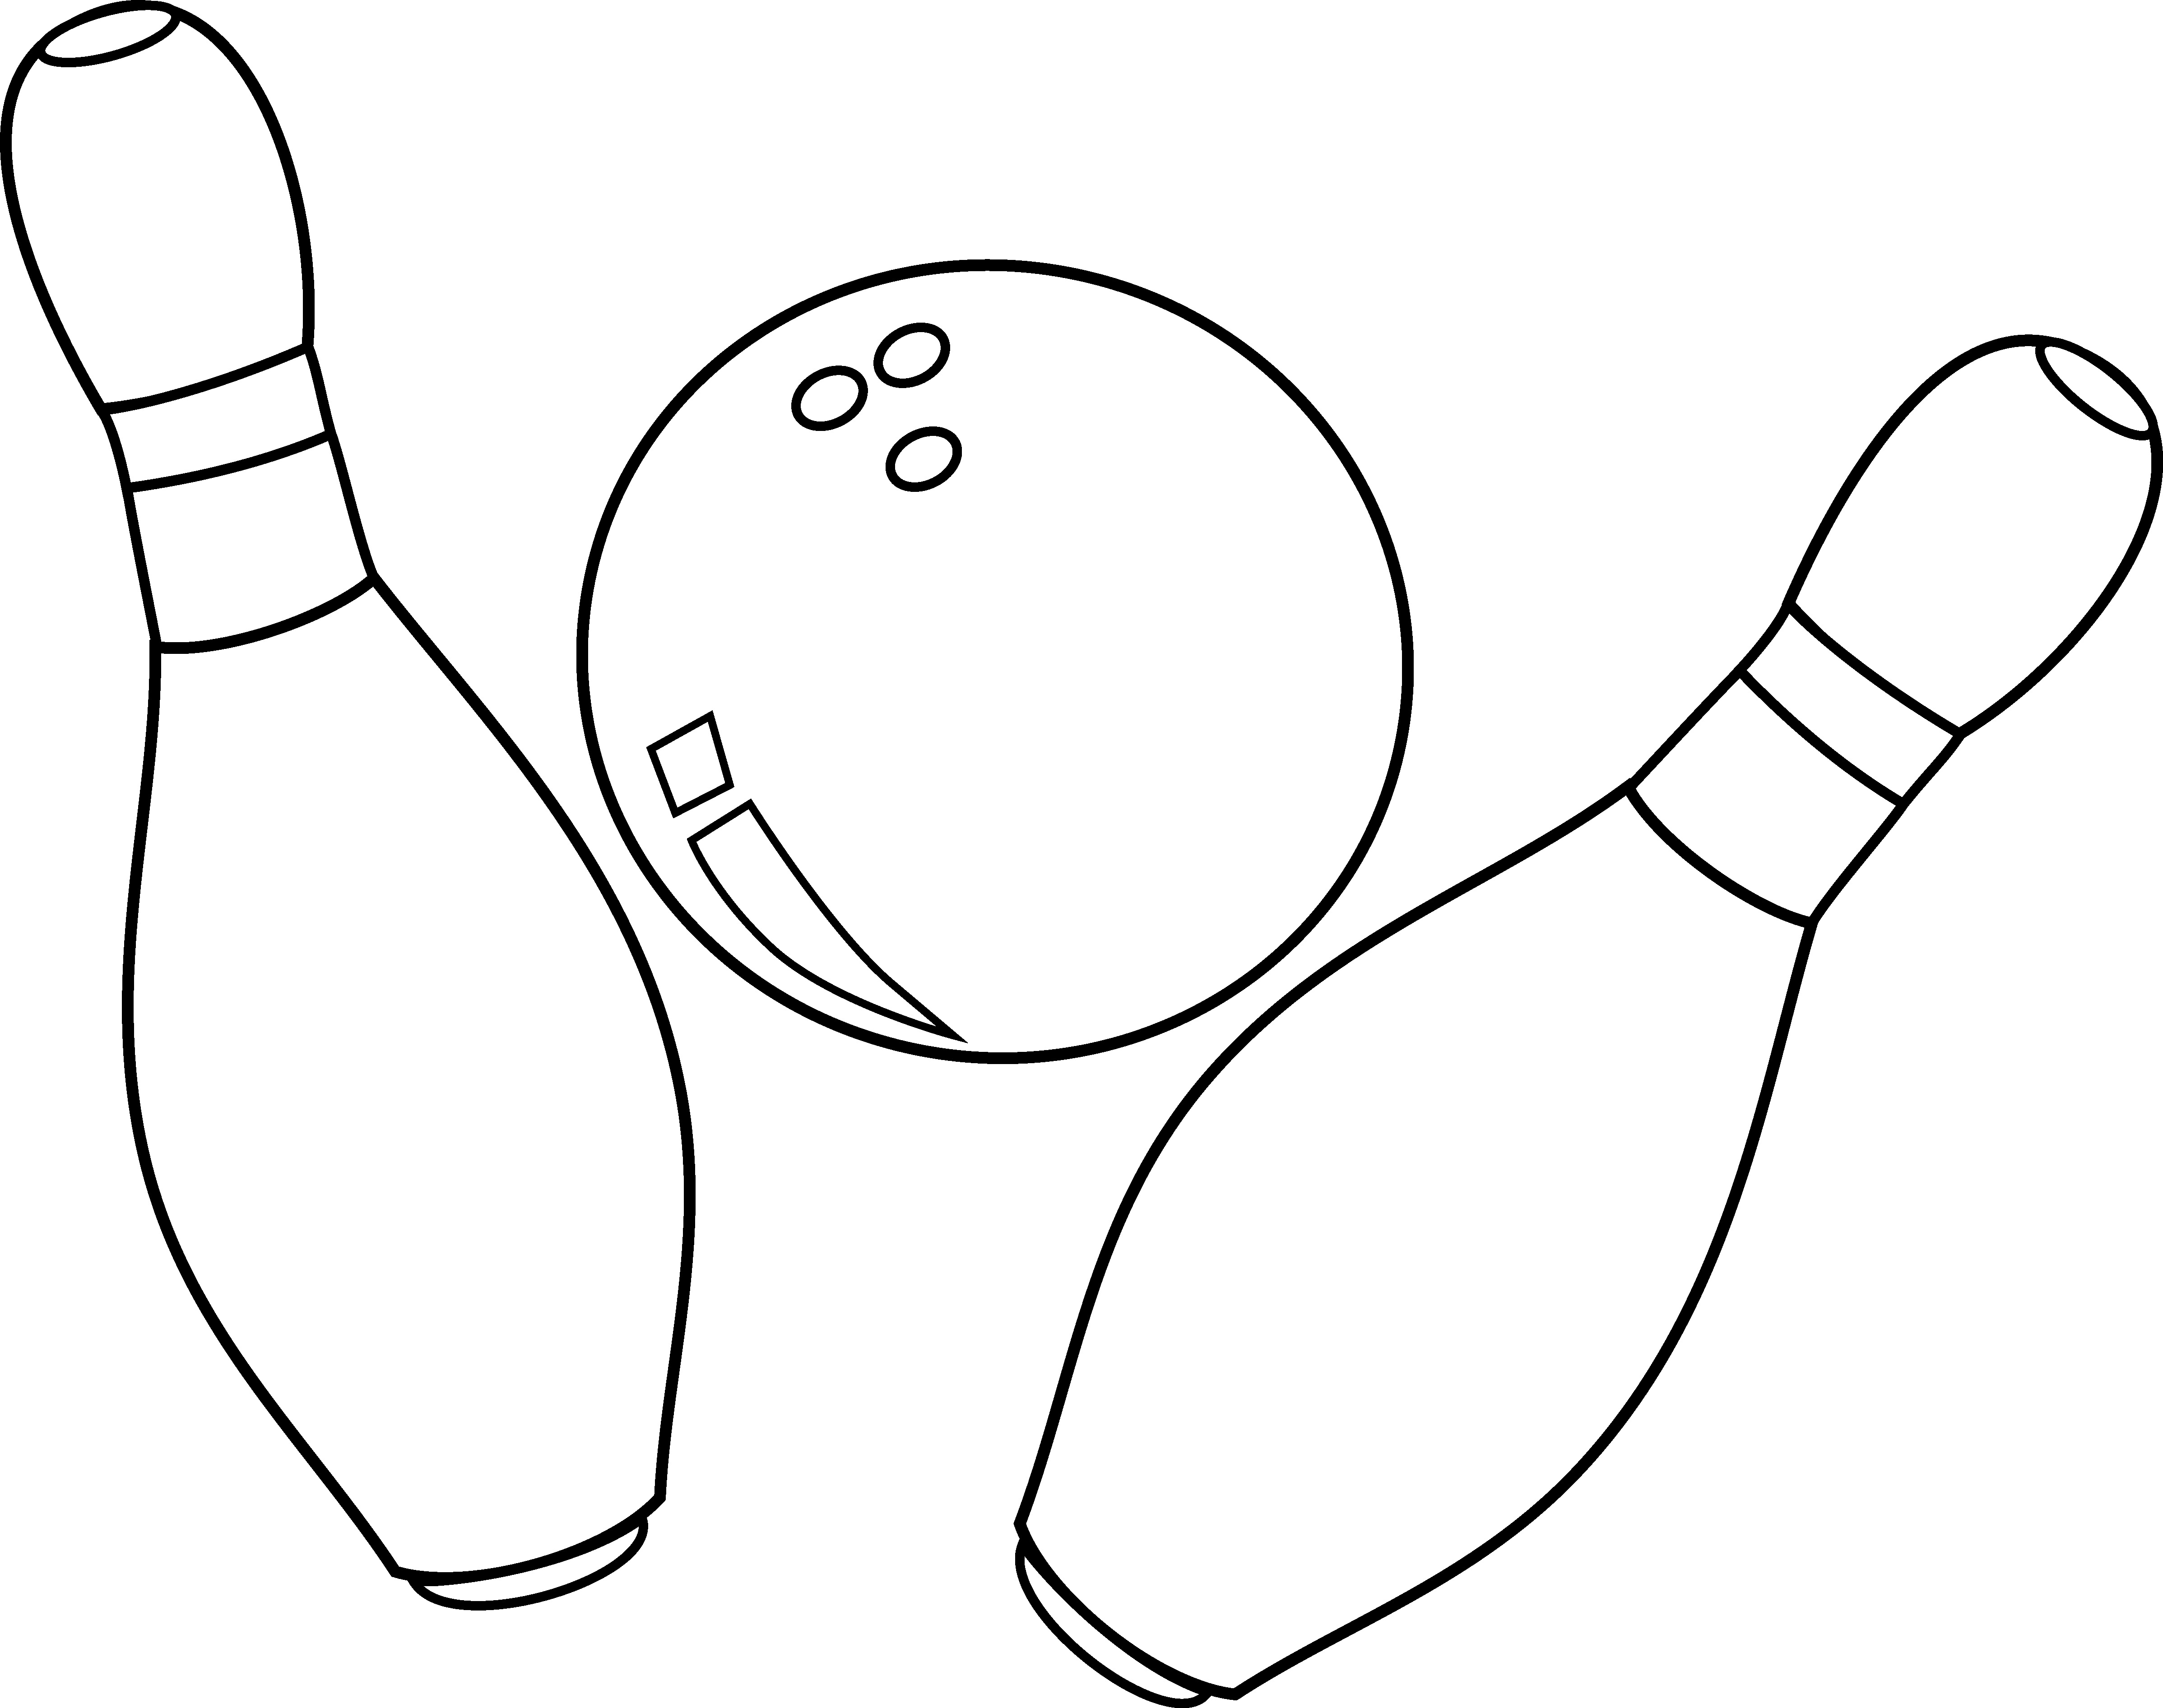 Free Bowling Pin Coloring Page, Download Free Clip Art, Free